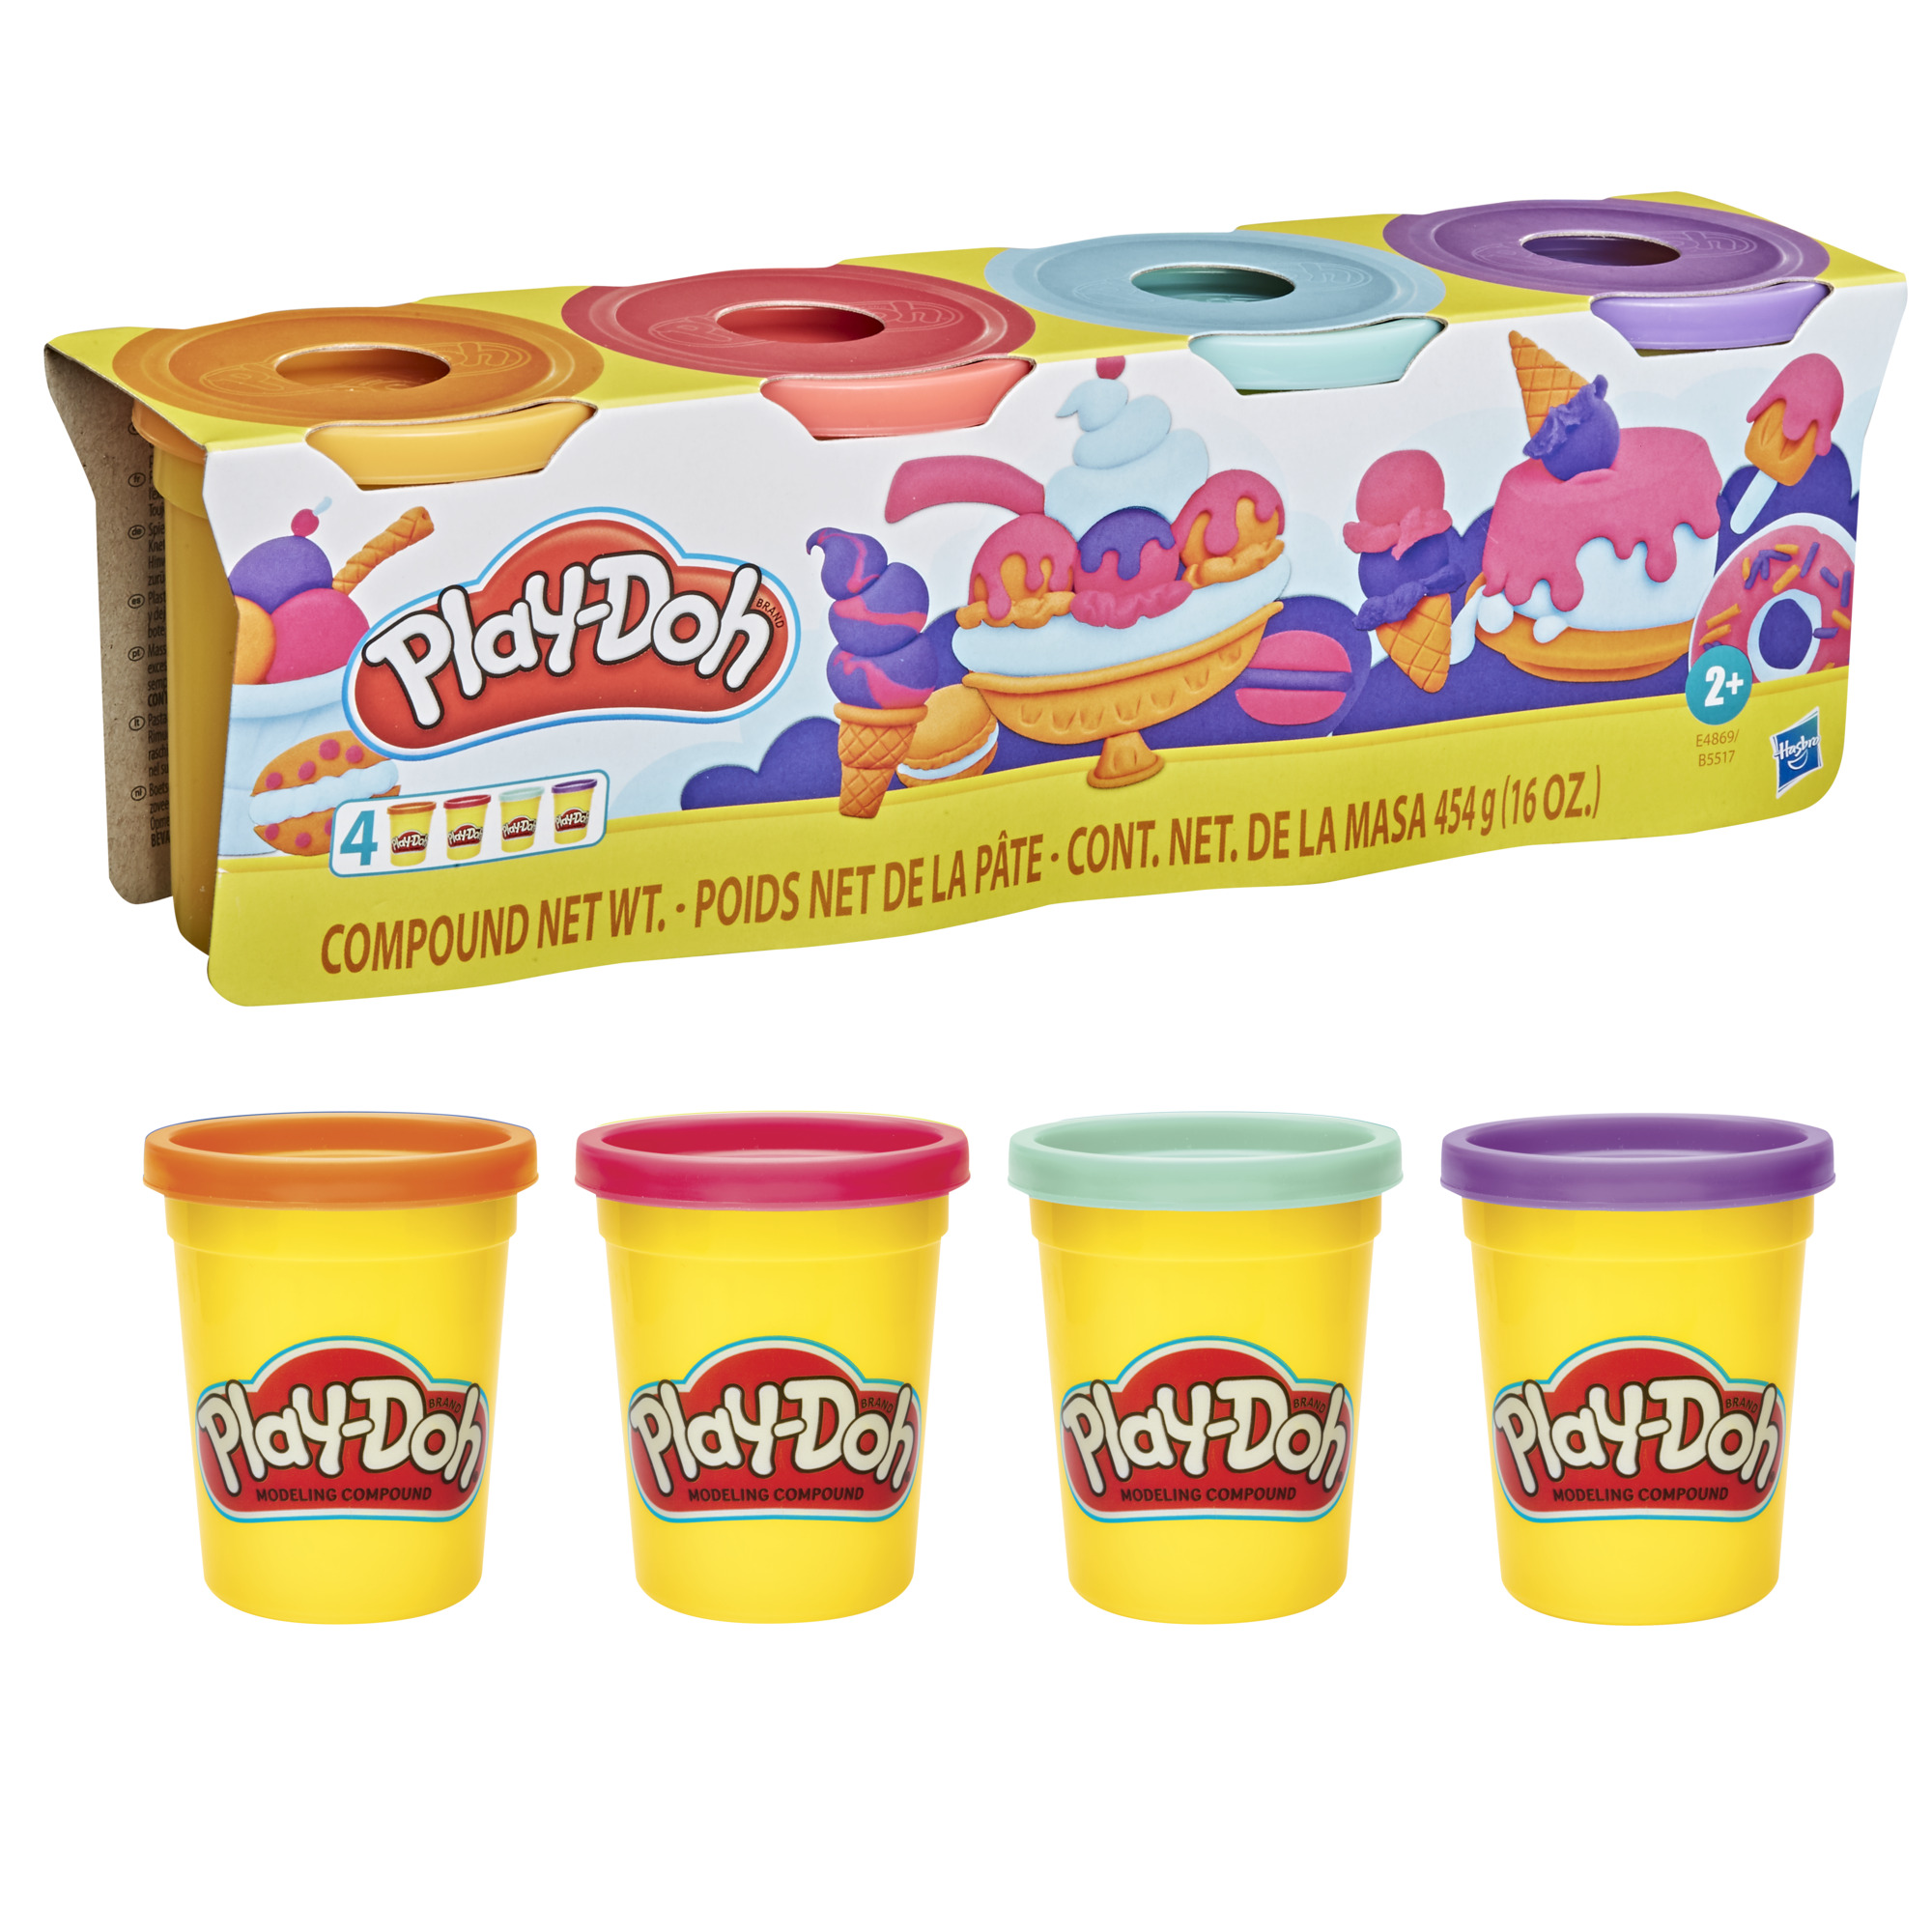 Play-Doh Modeling Compound Color Wheel Play-Doh Set, 4 Color (4 Piece), Kids Toddler Easter Toy for Boys and Girls Easter Basket Stuffers, Age 3 4 5 6 7 and Up - image 1 of 5